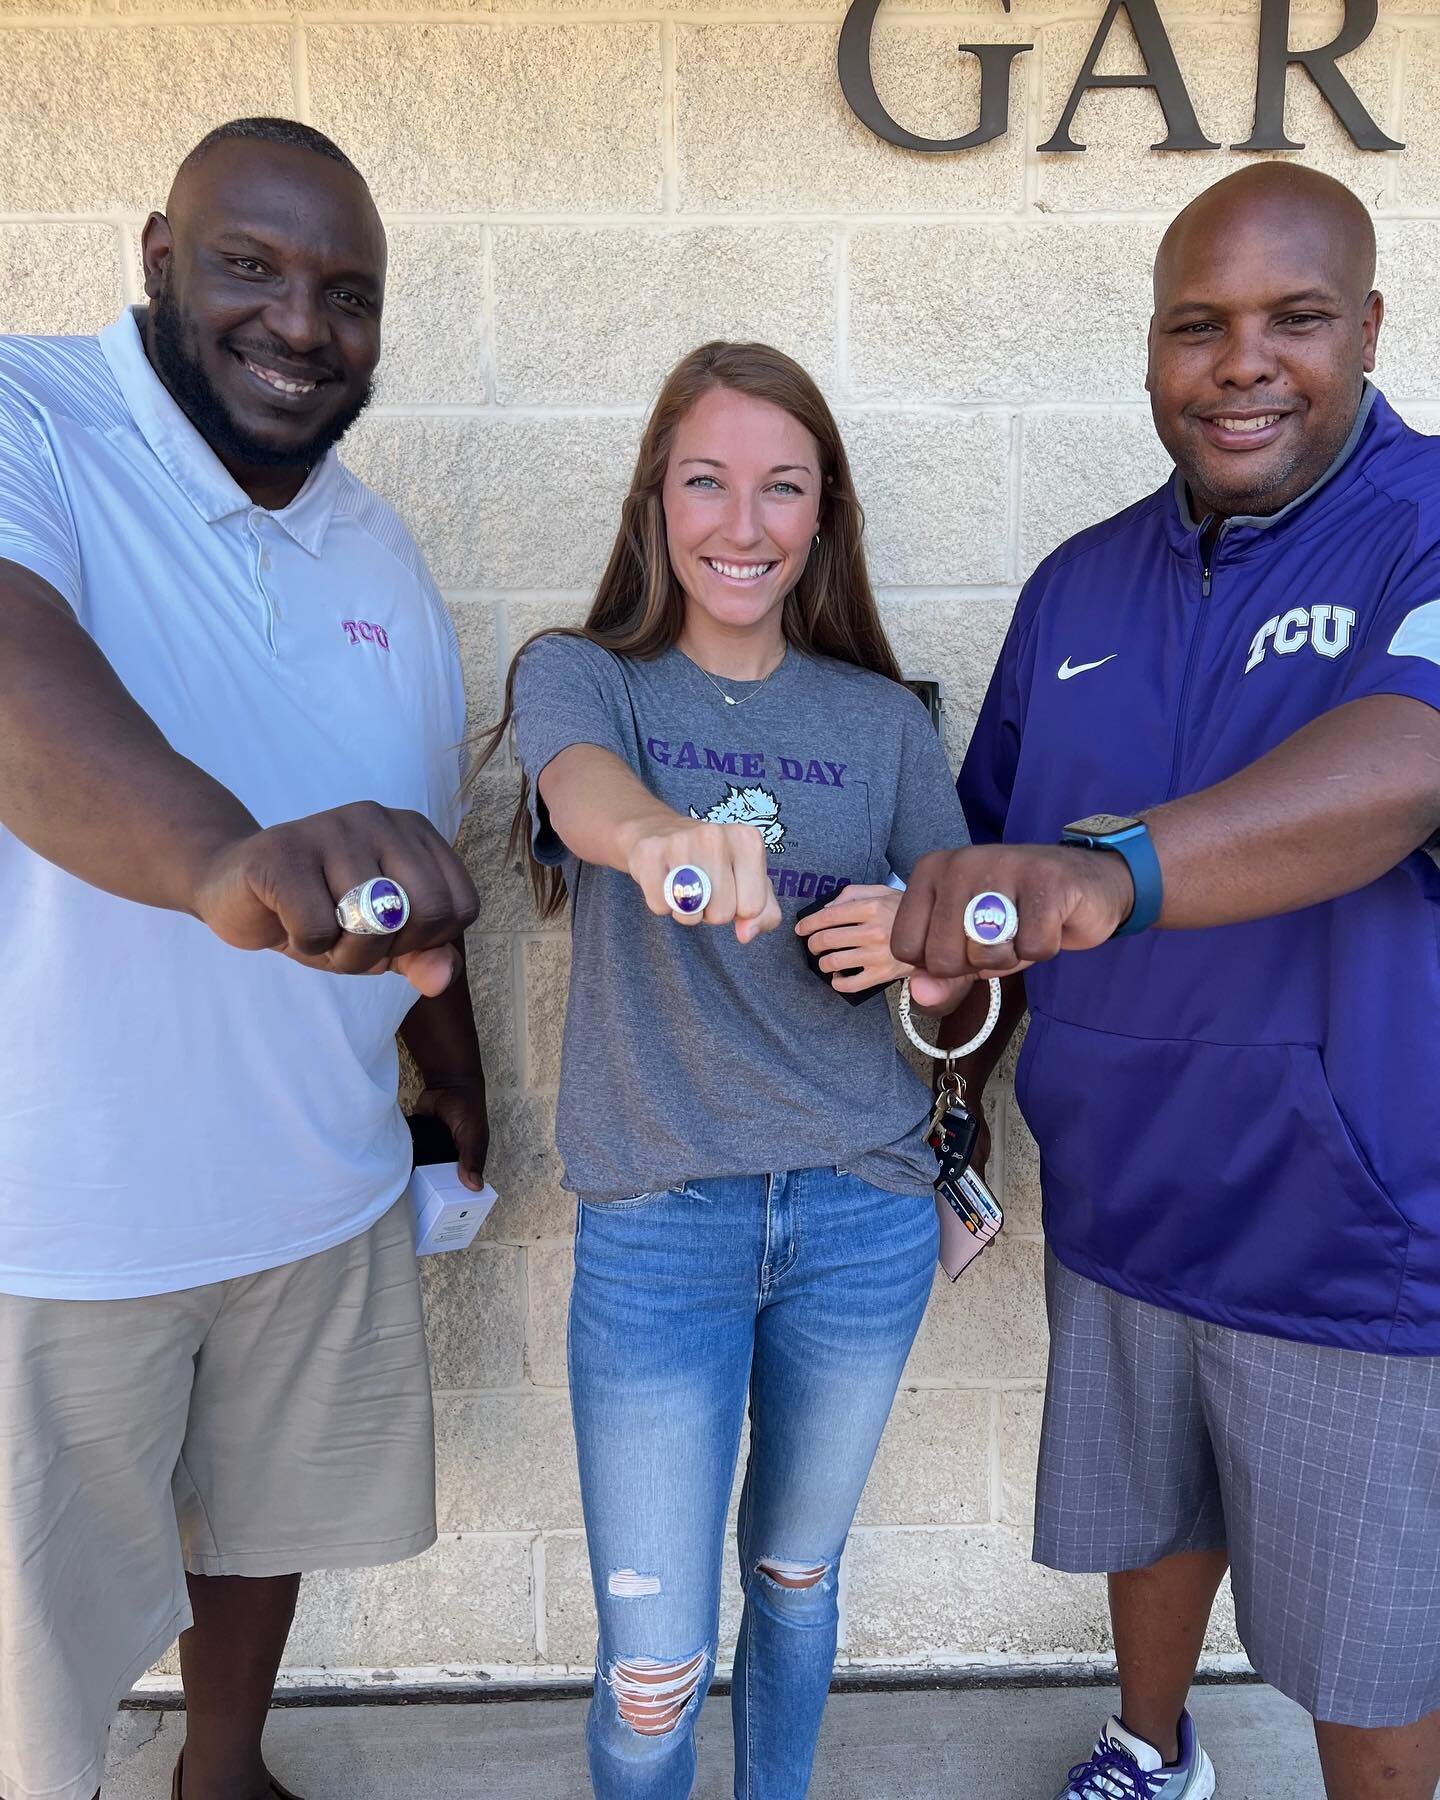 We want to thank Coach @e_2_the_b and @tcuwsoccer for allowing the TCU FCA staff to serve their program! We are humbled that the program would gift the TCU FCA Character Coaches with a championship ring, too! It&rsquo;s an honor to serve and be a par